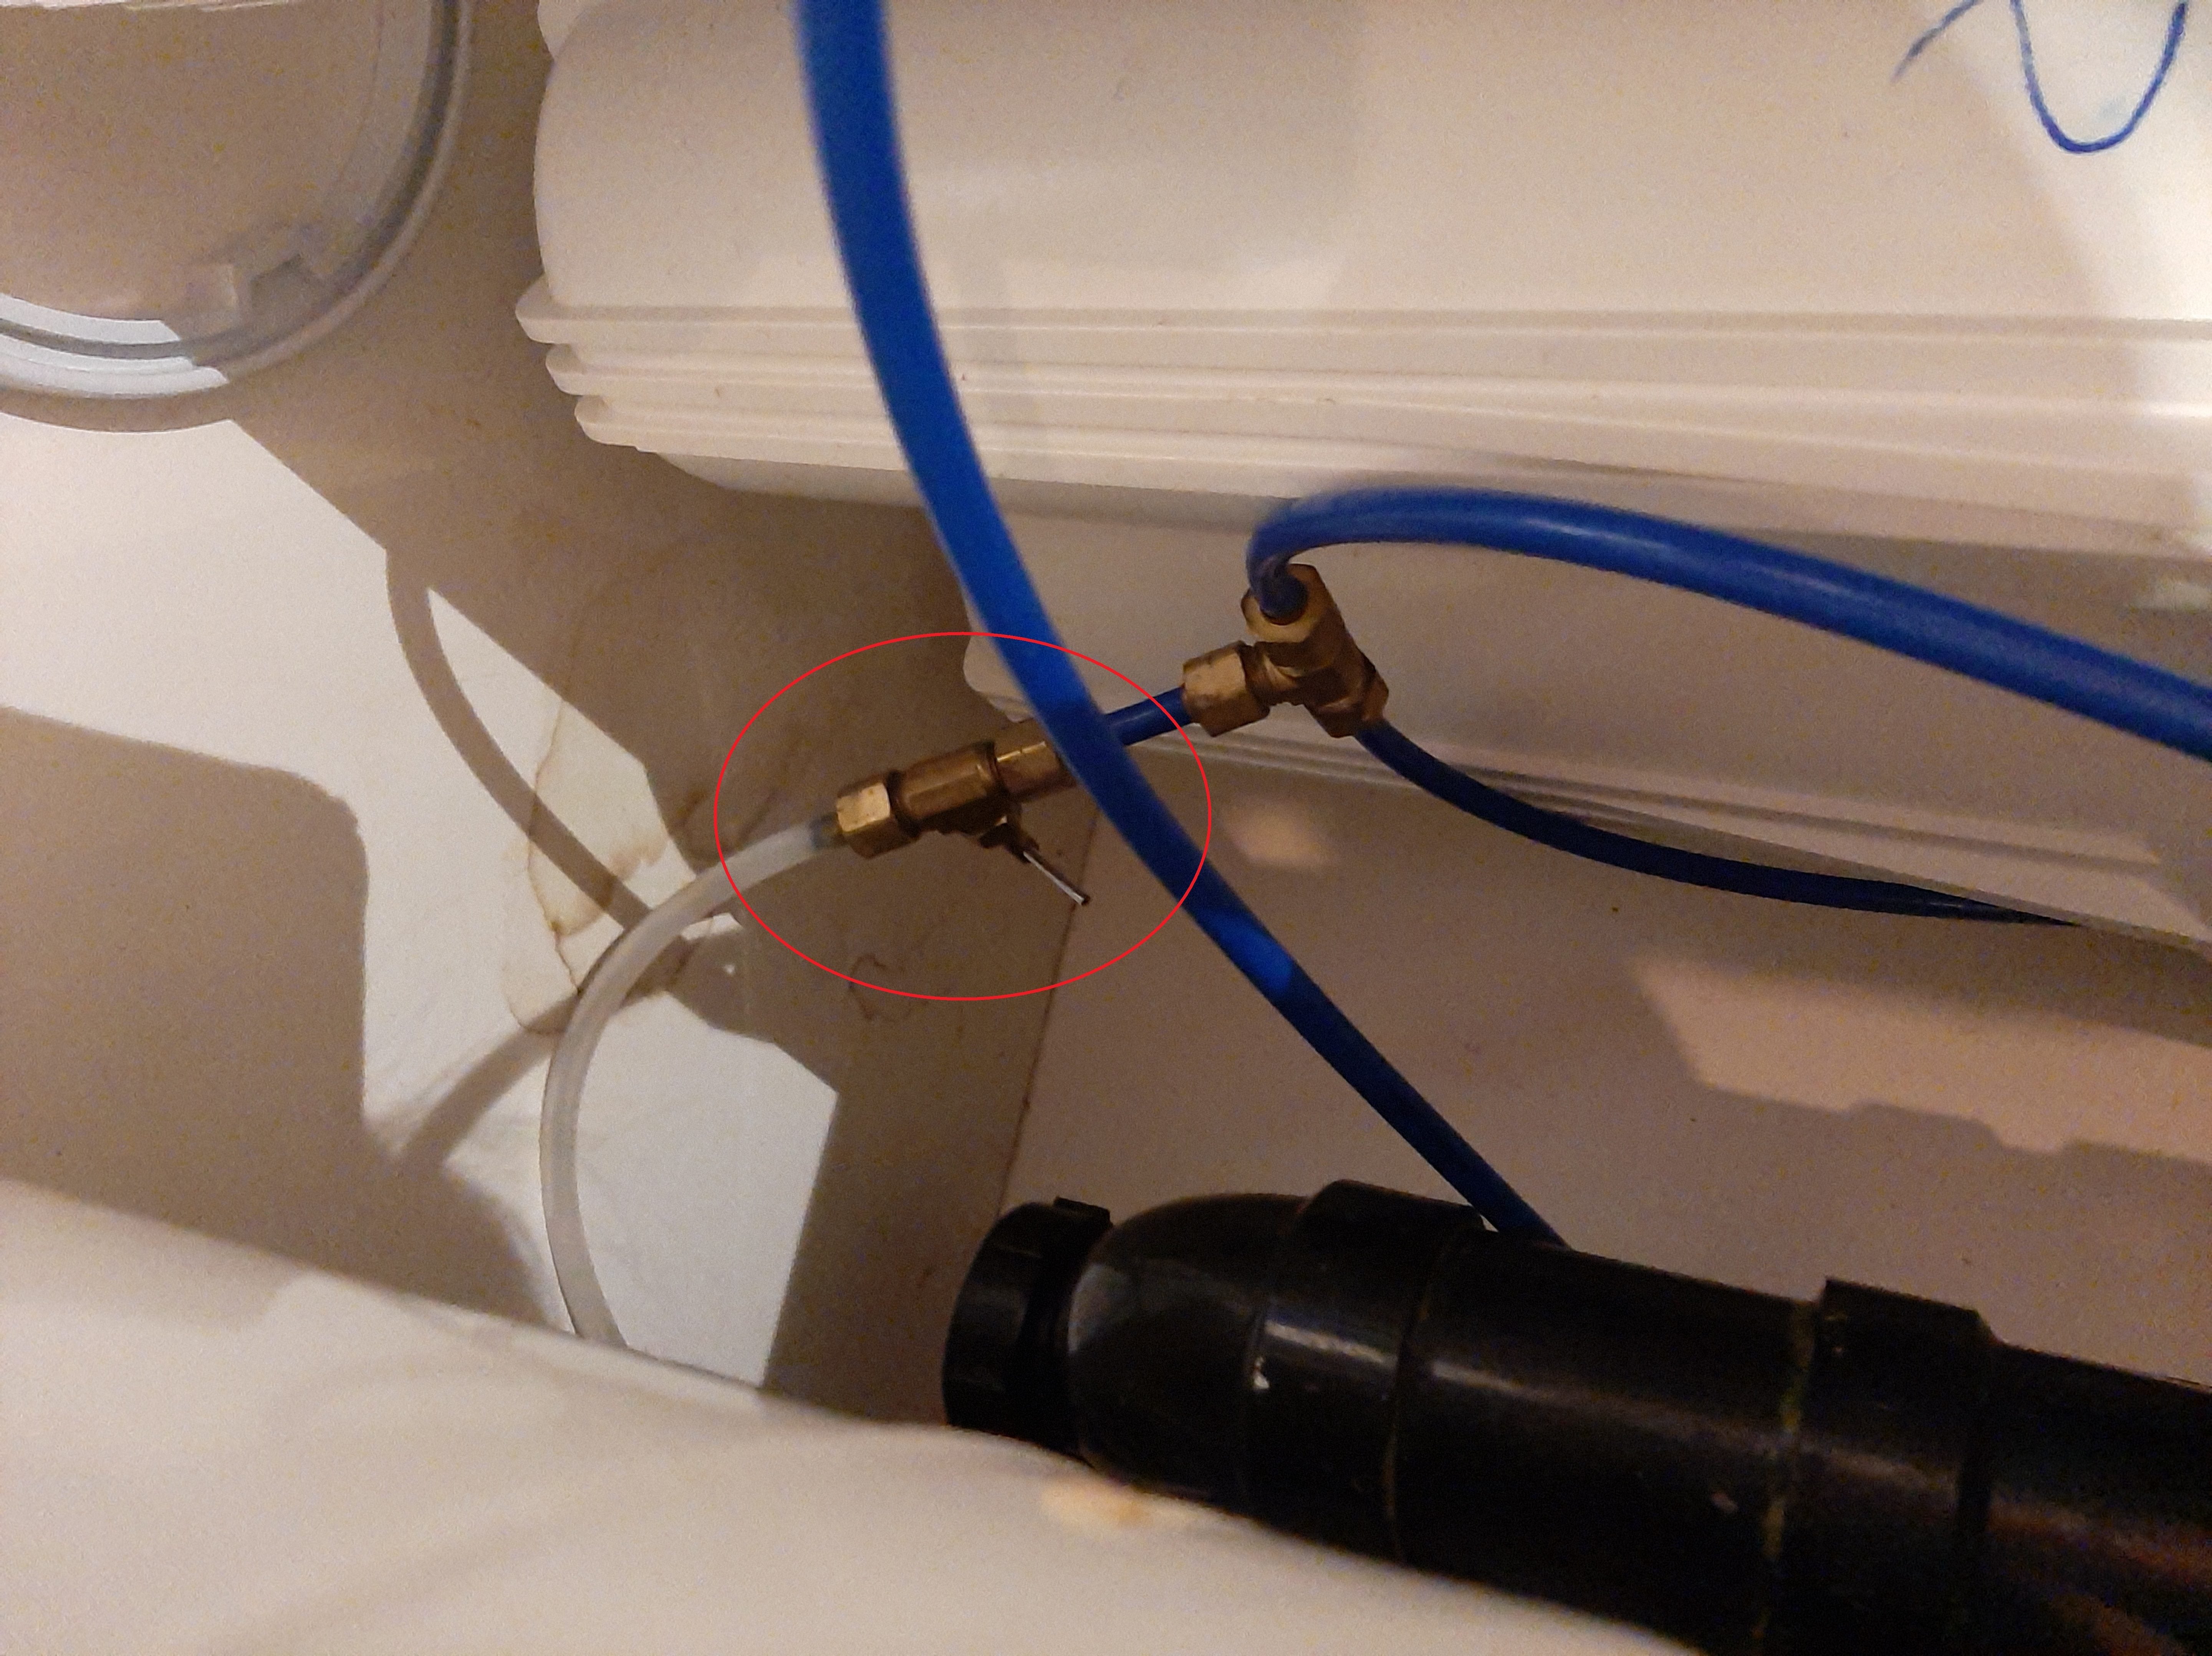 How to cap off old decomissioned fridge water line - RedFlagDeals